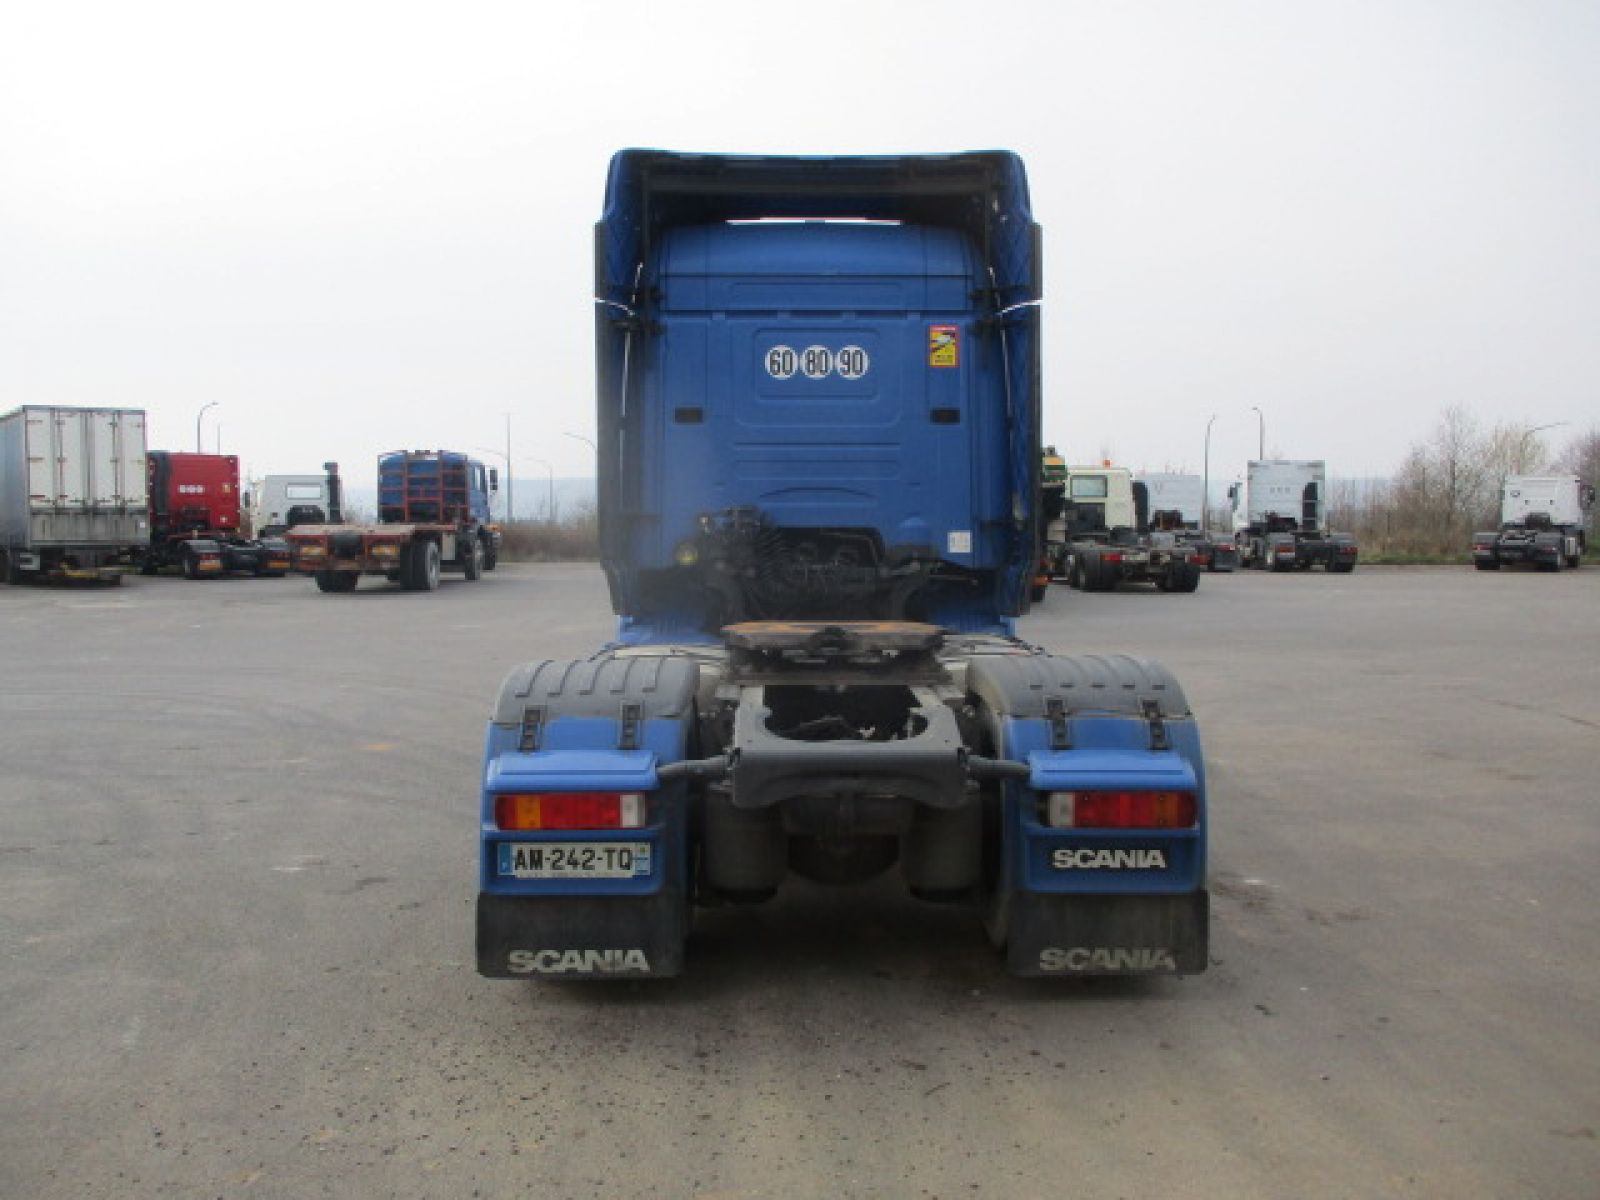 Vente occasion  Tracteur - SCANIA R480  TRACTEUR (Belgique - Europe) - Houffalize Trading s.a.